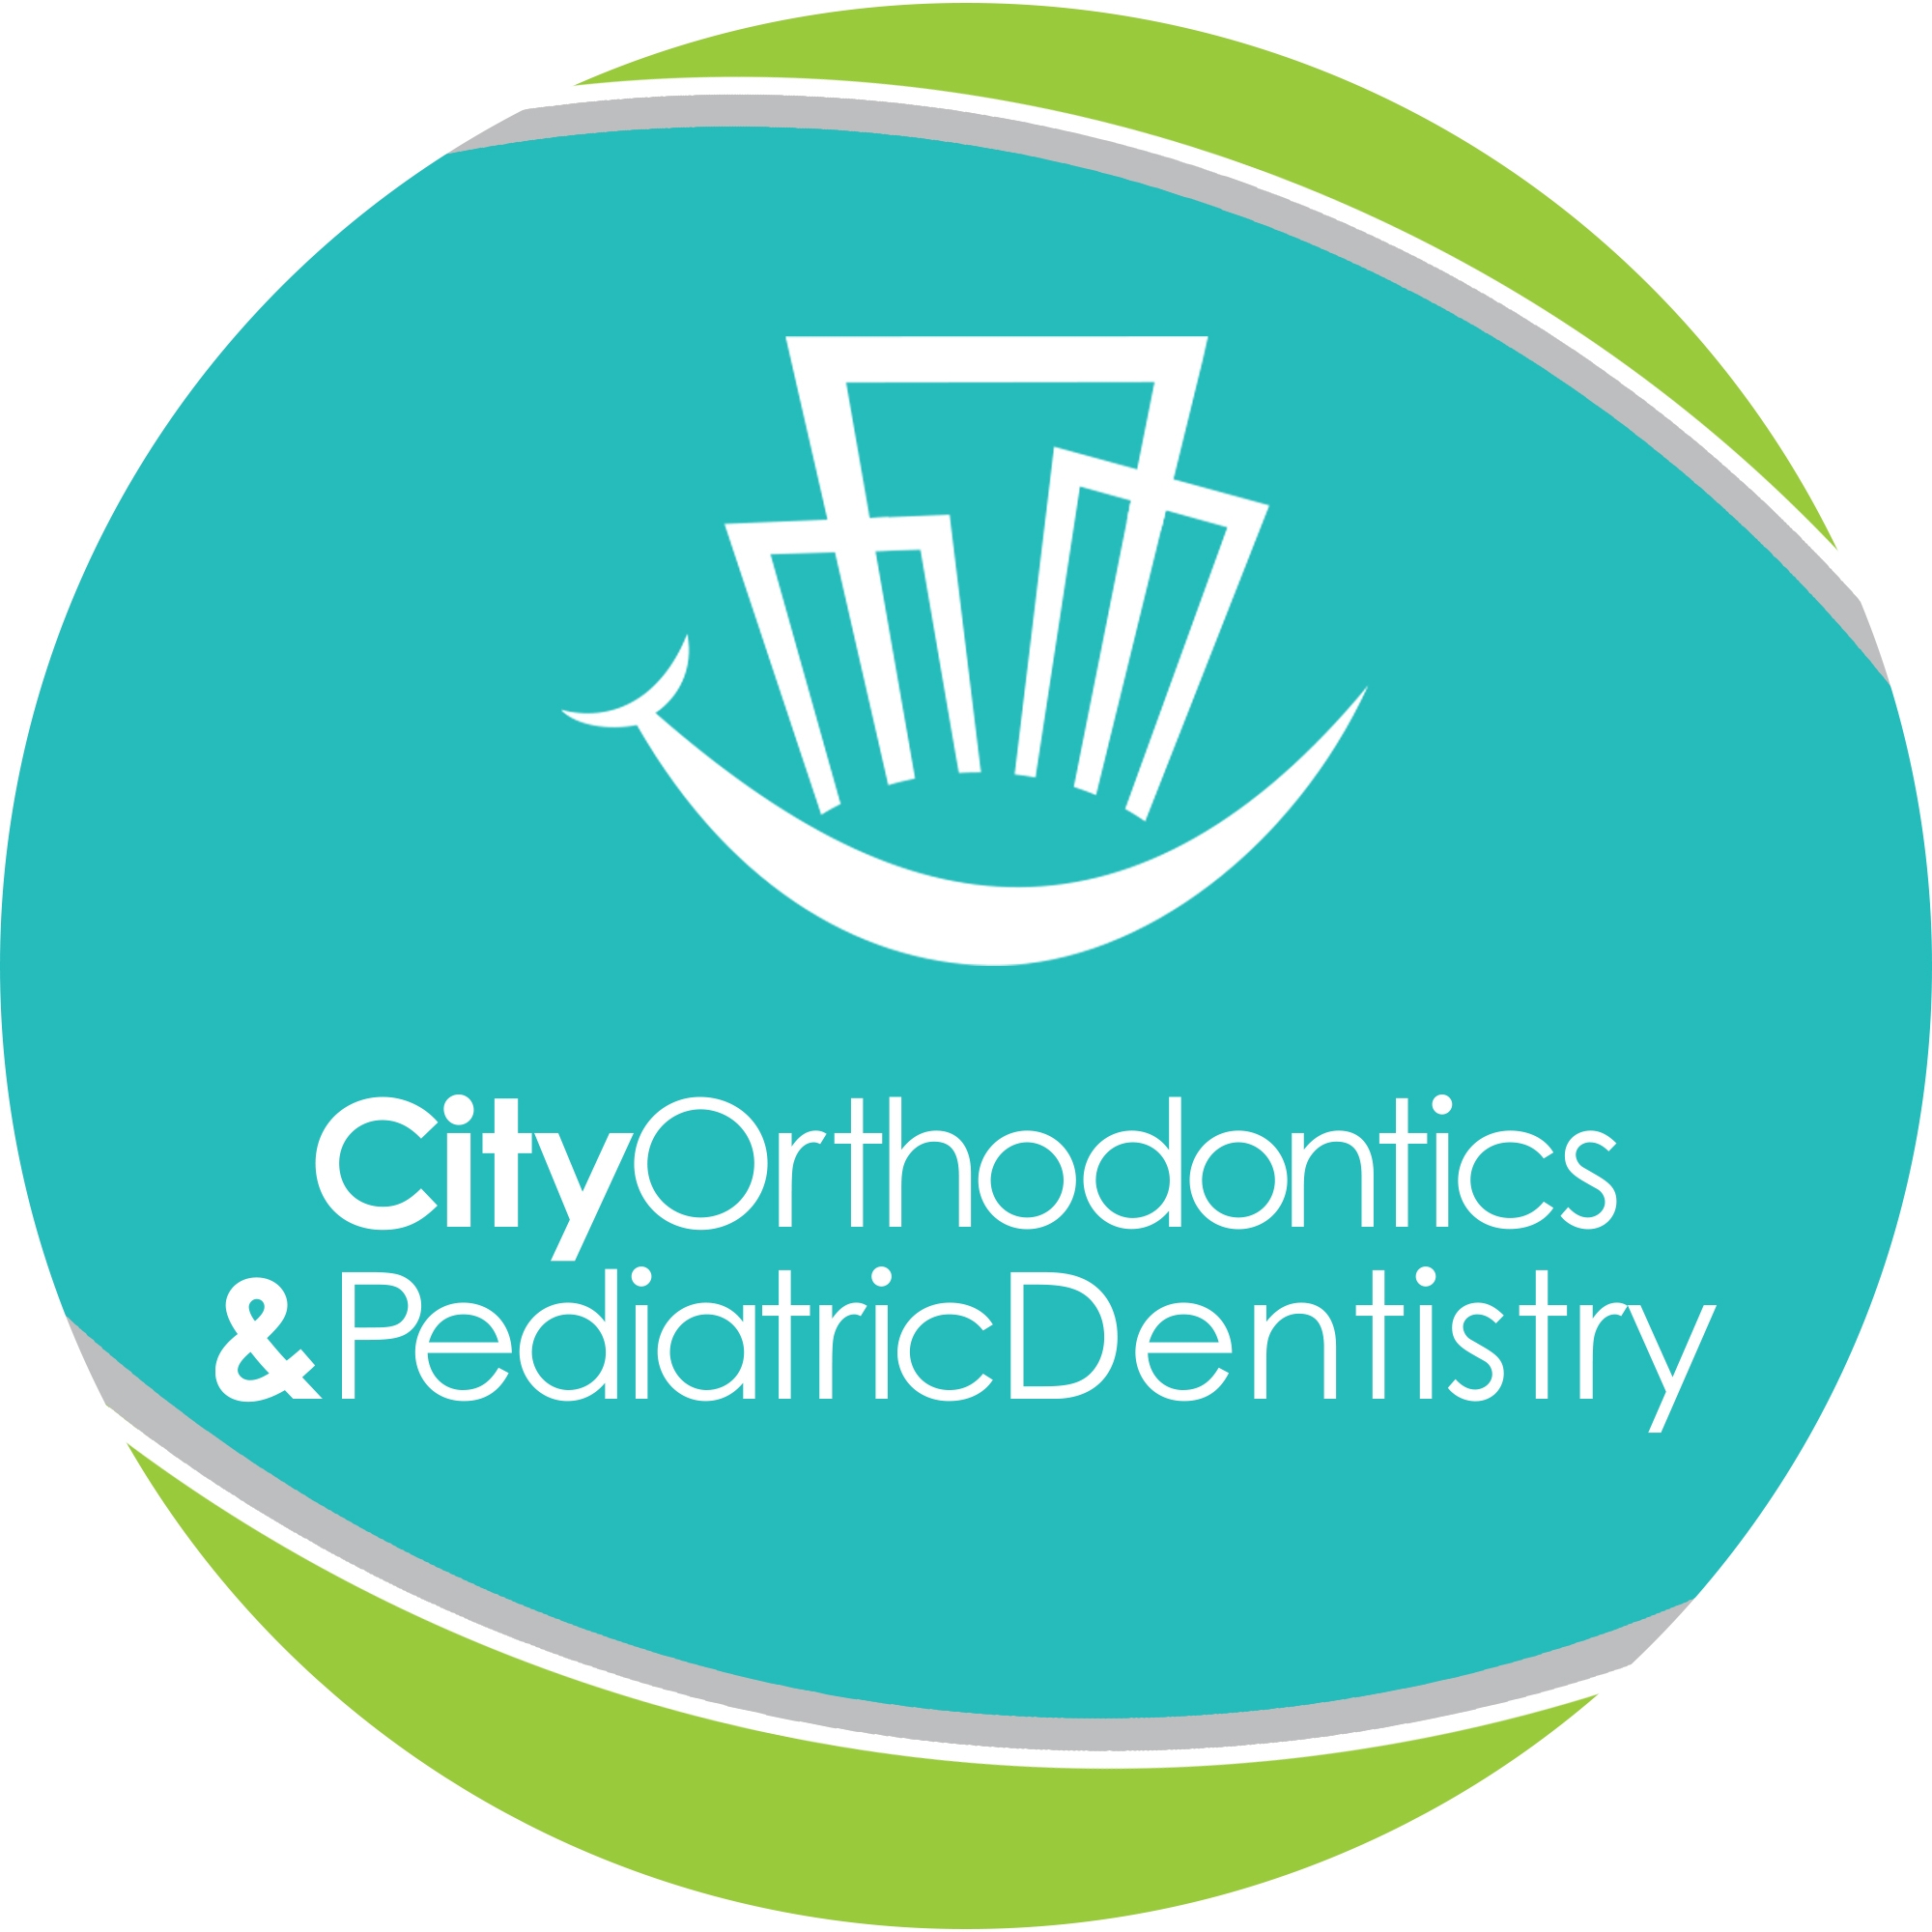 City Orthodontics and Pediatric Dentistry | dentist | 9948 153 Ave NW, Edmonton, AB T5X 6A4, Canada | 7807571001 OR +1 780-757-1001